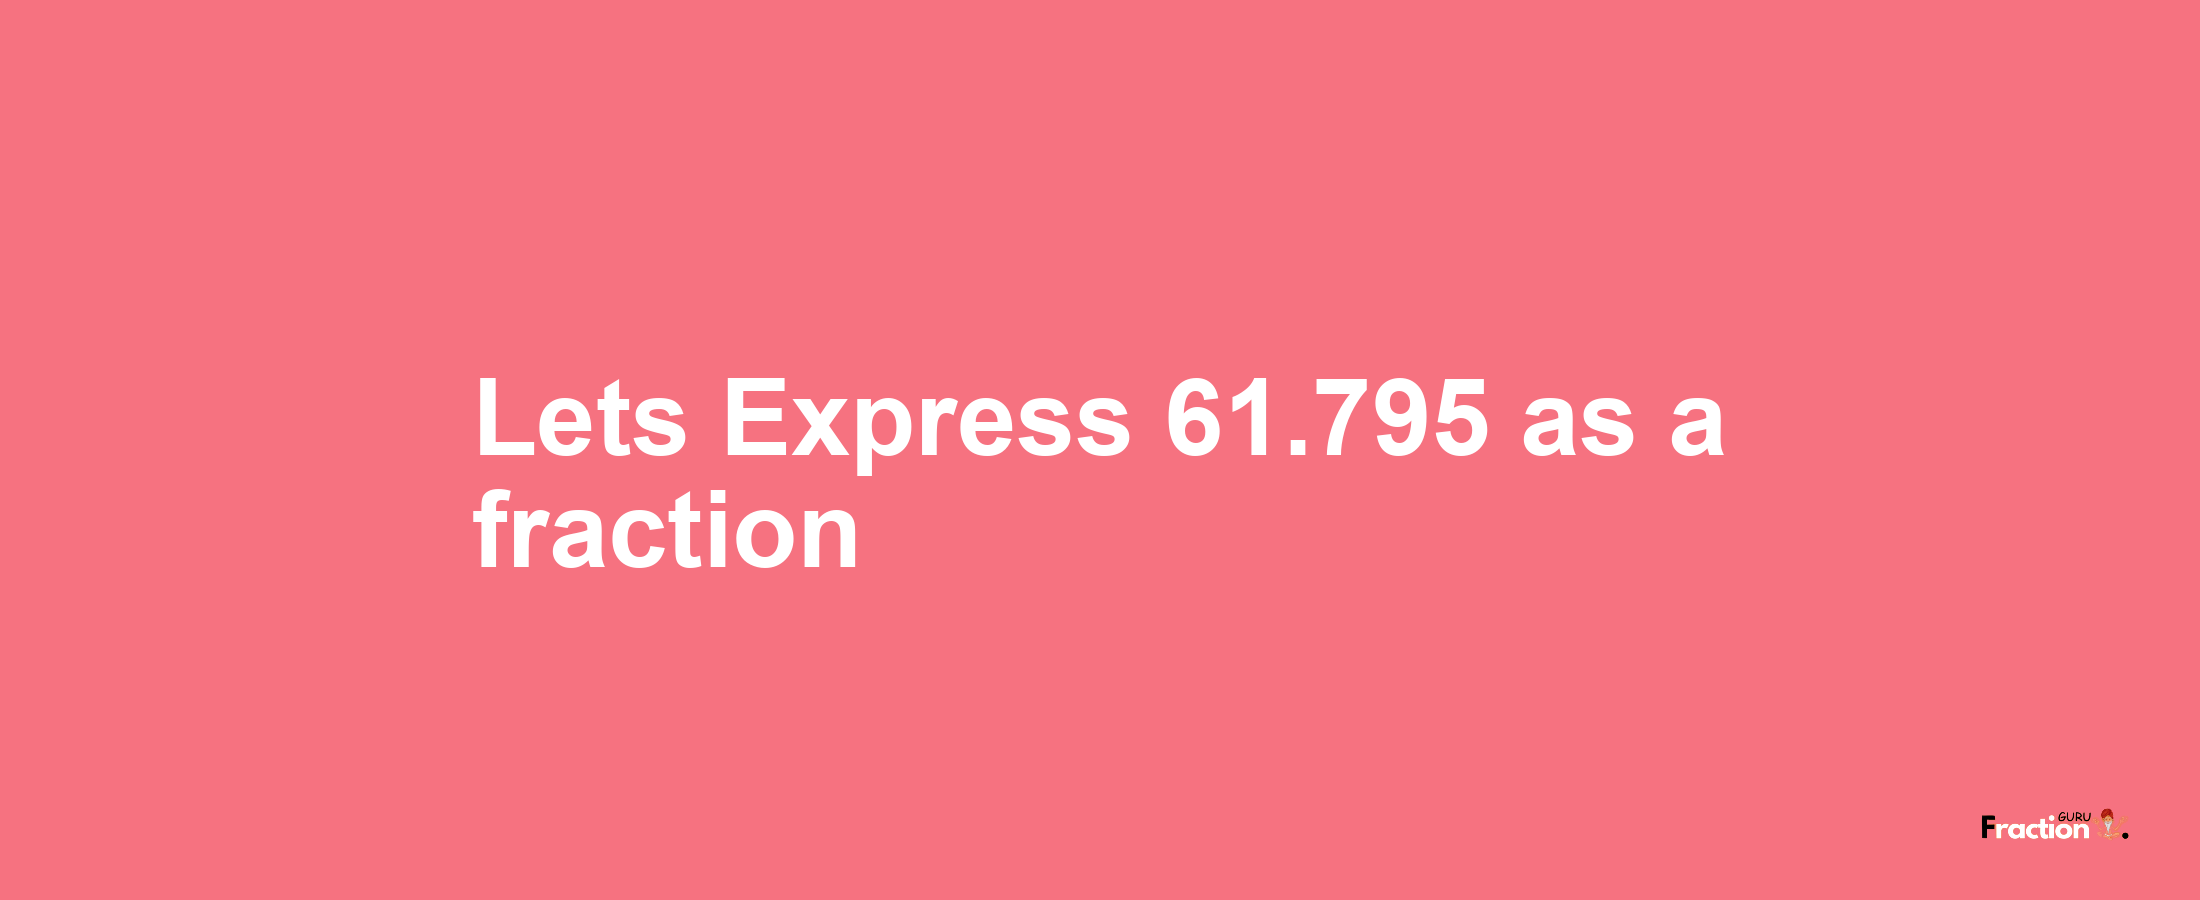 Lets Express 61.795 as afraction